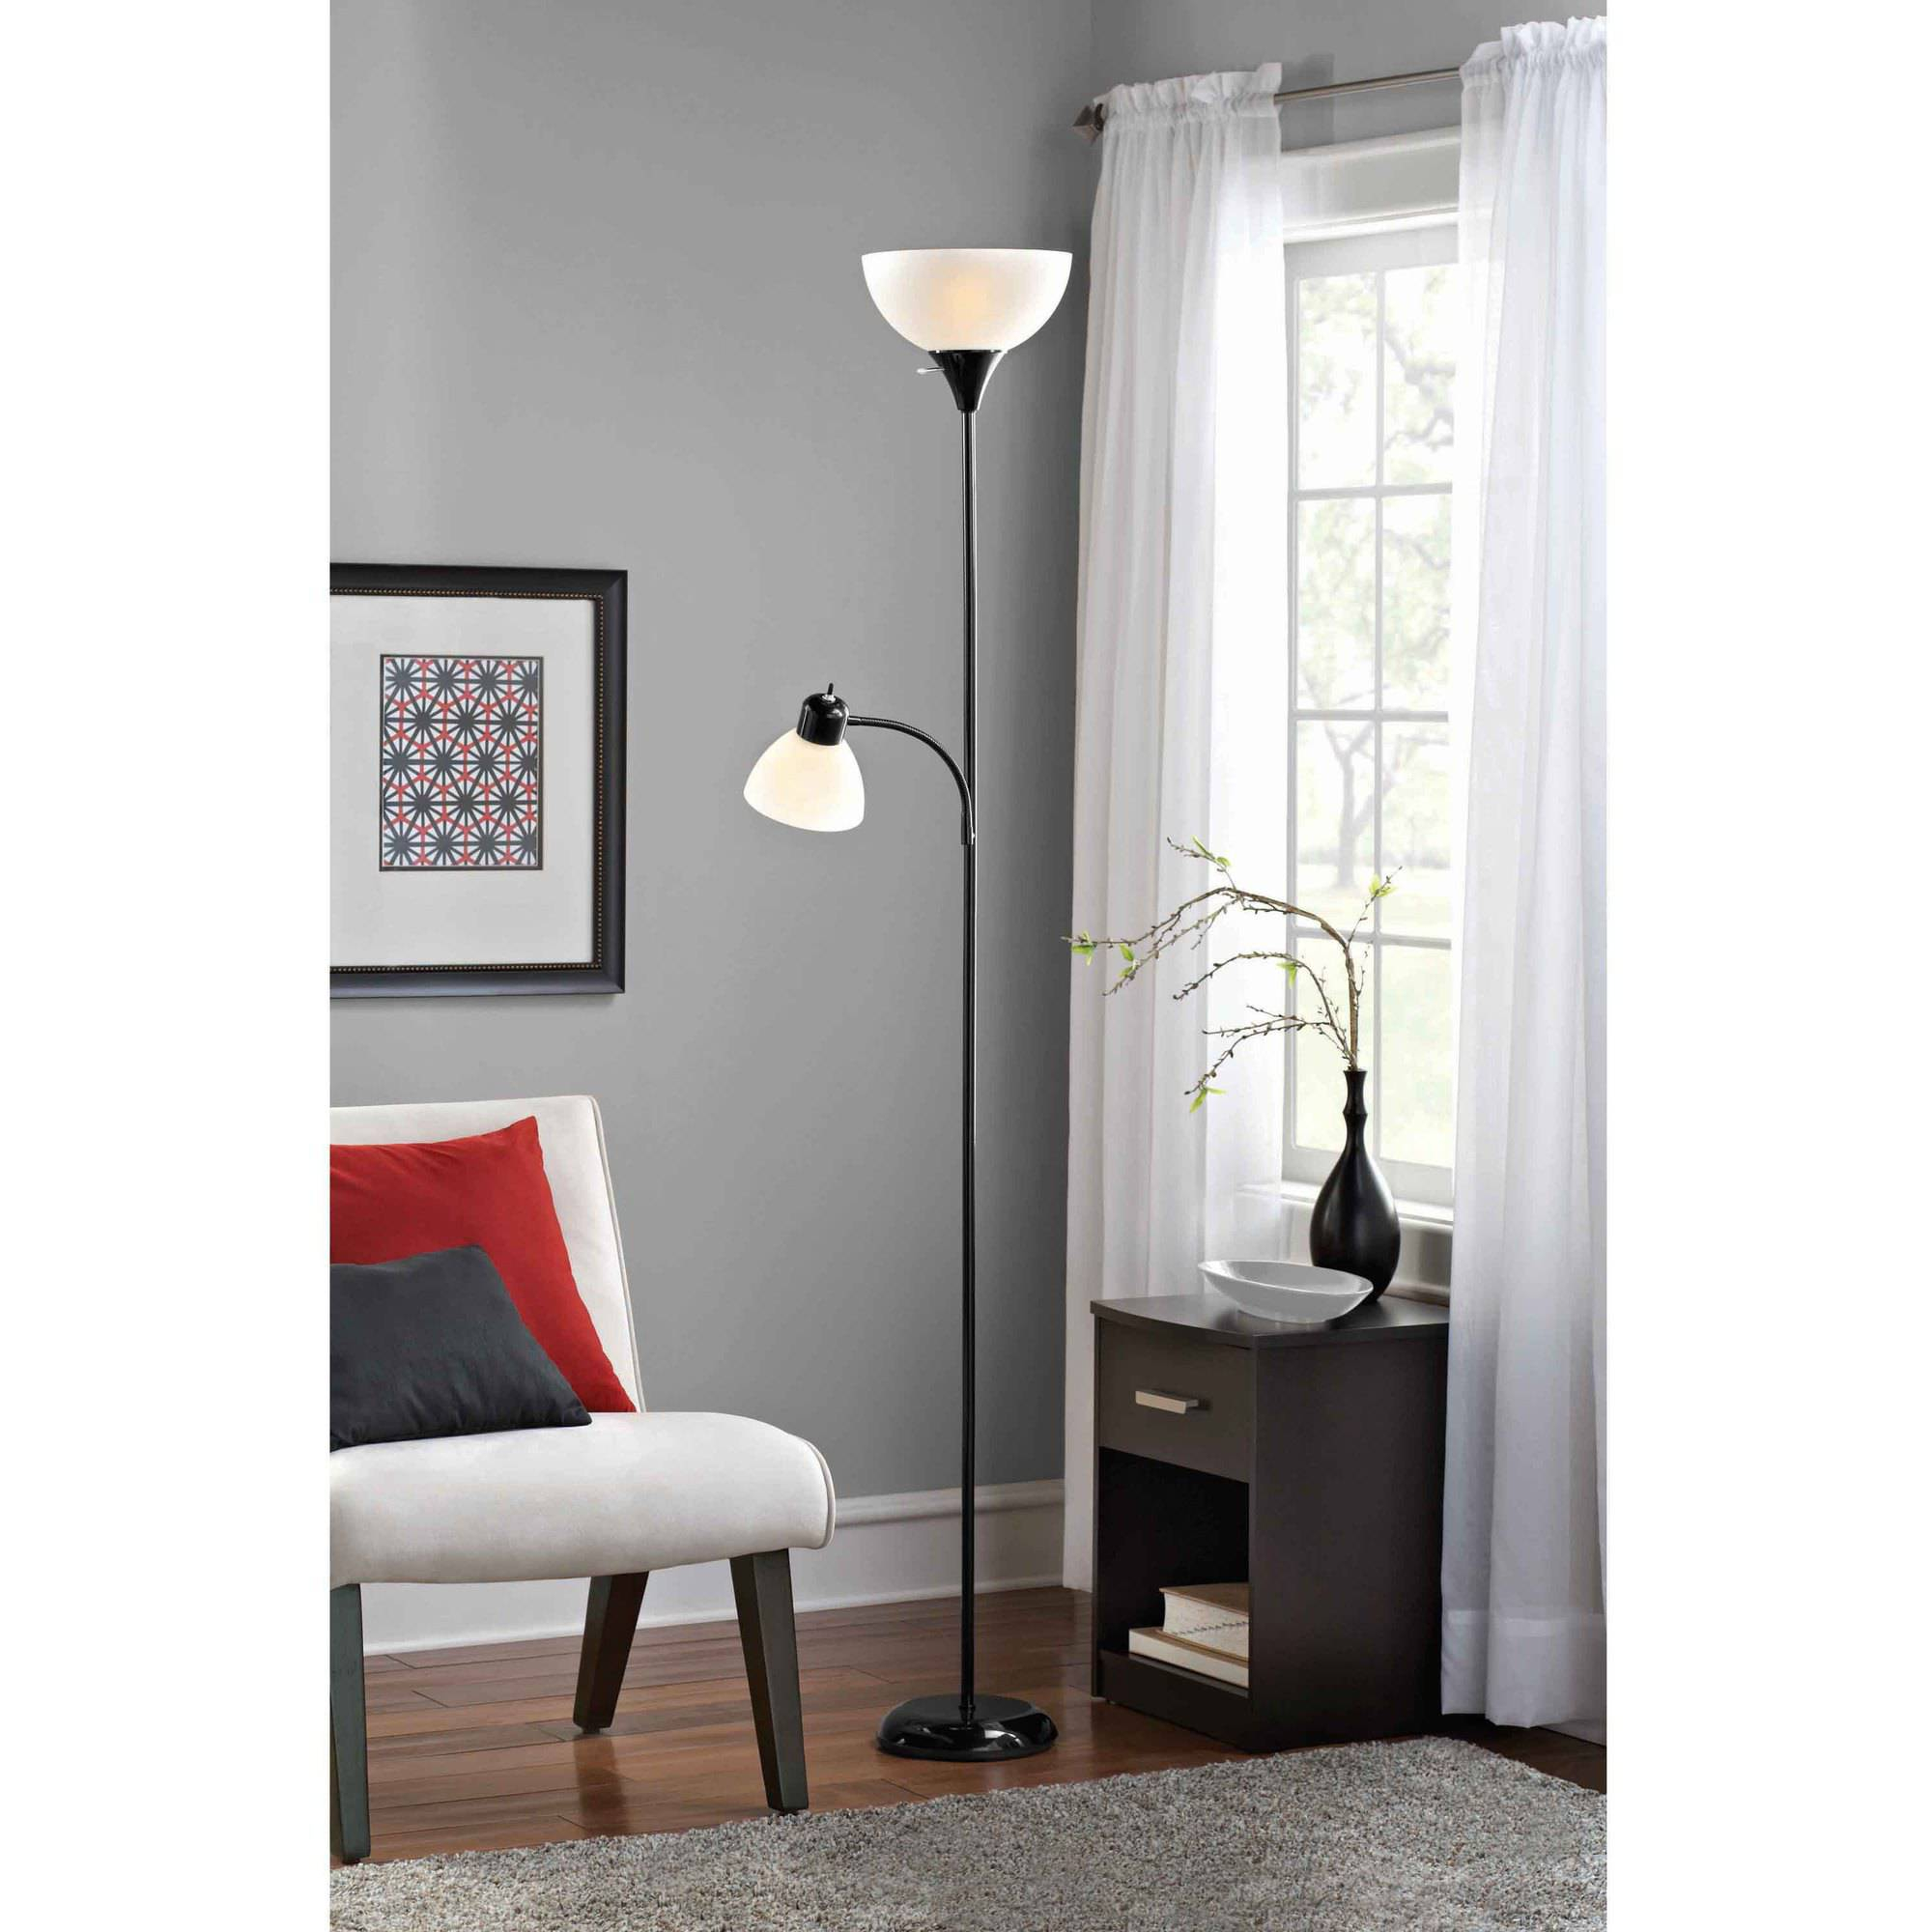 Mainstays Combo Floor Lamp With Bulbs Included Walmart throughout size 2000 X 2000